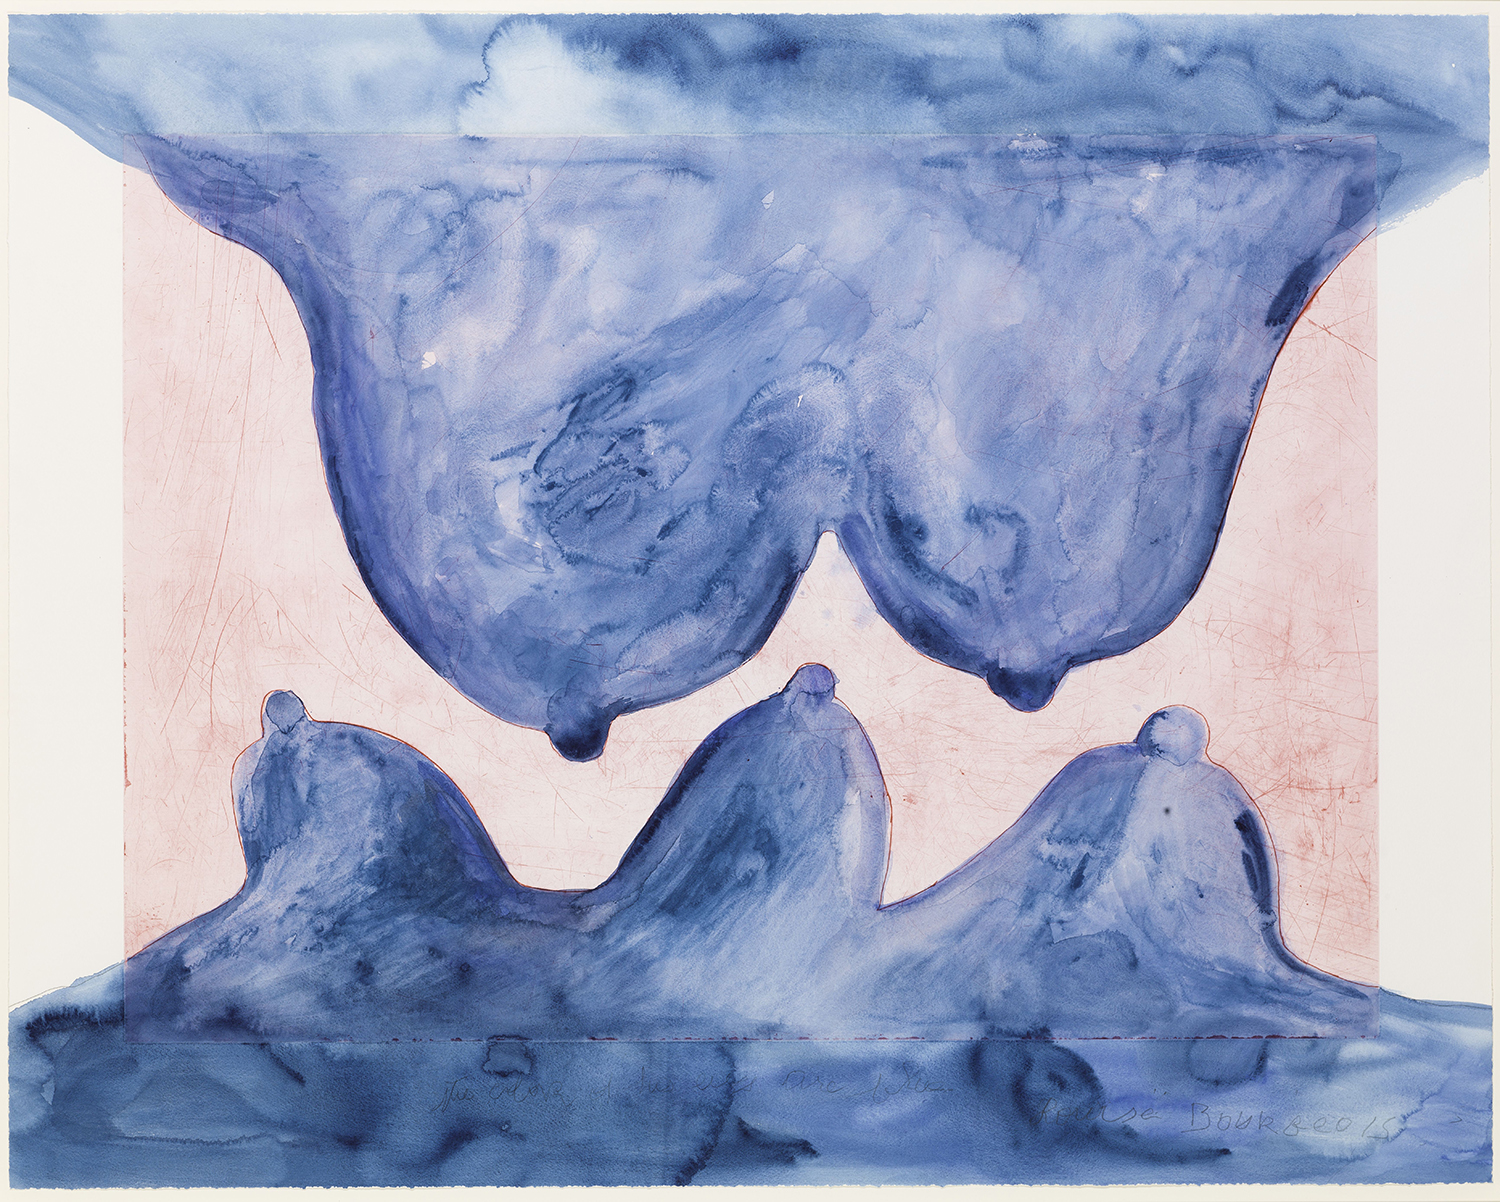 Painting by Louise Bourgeois